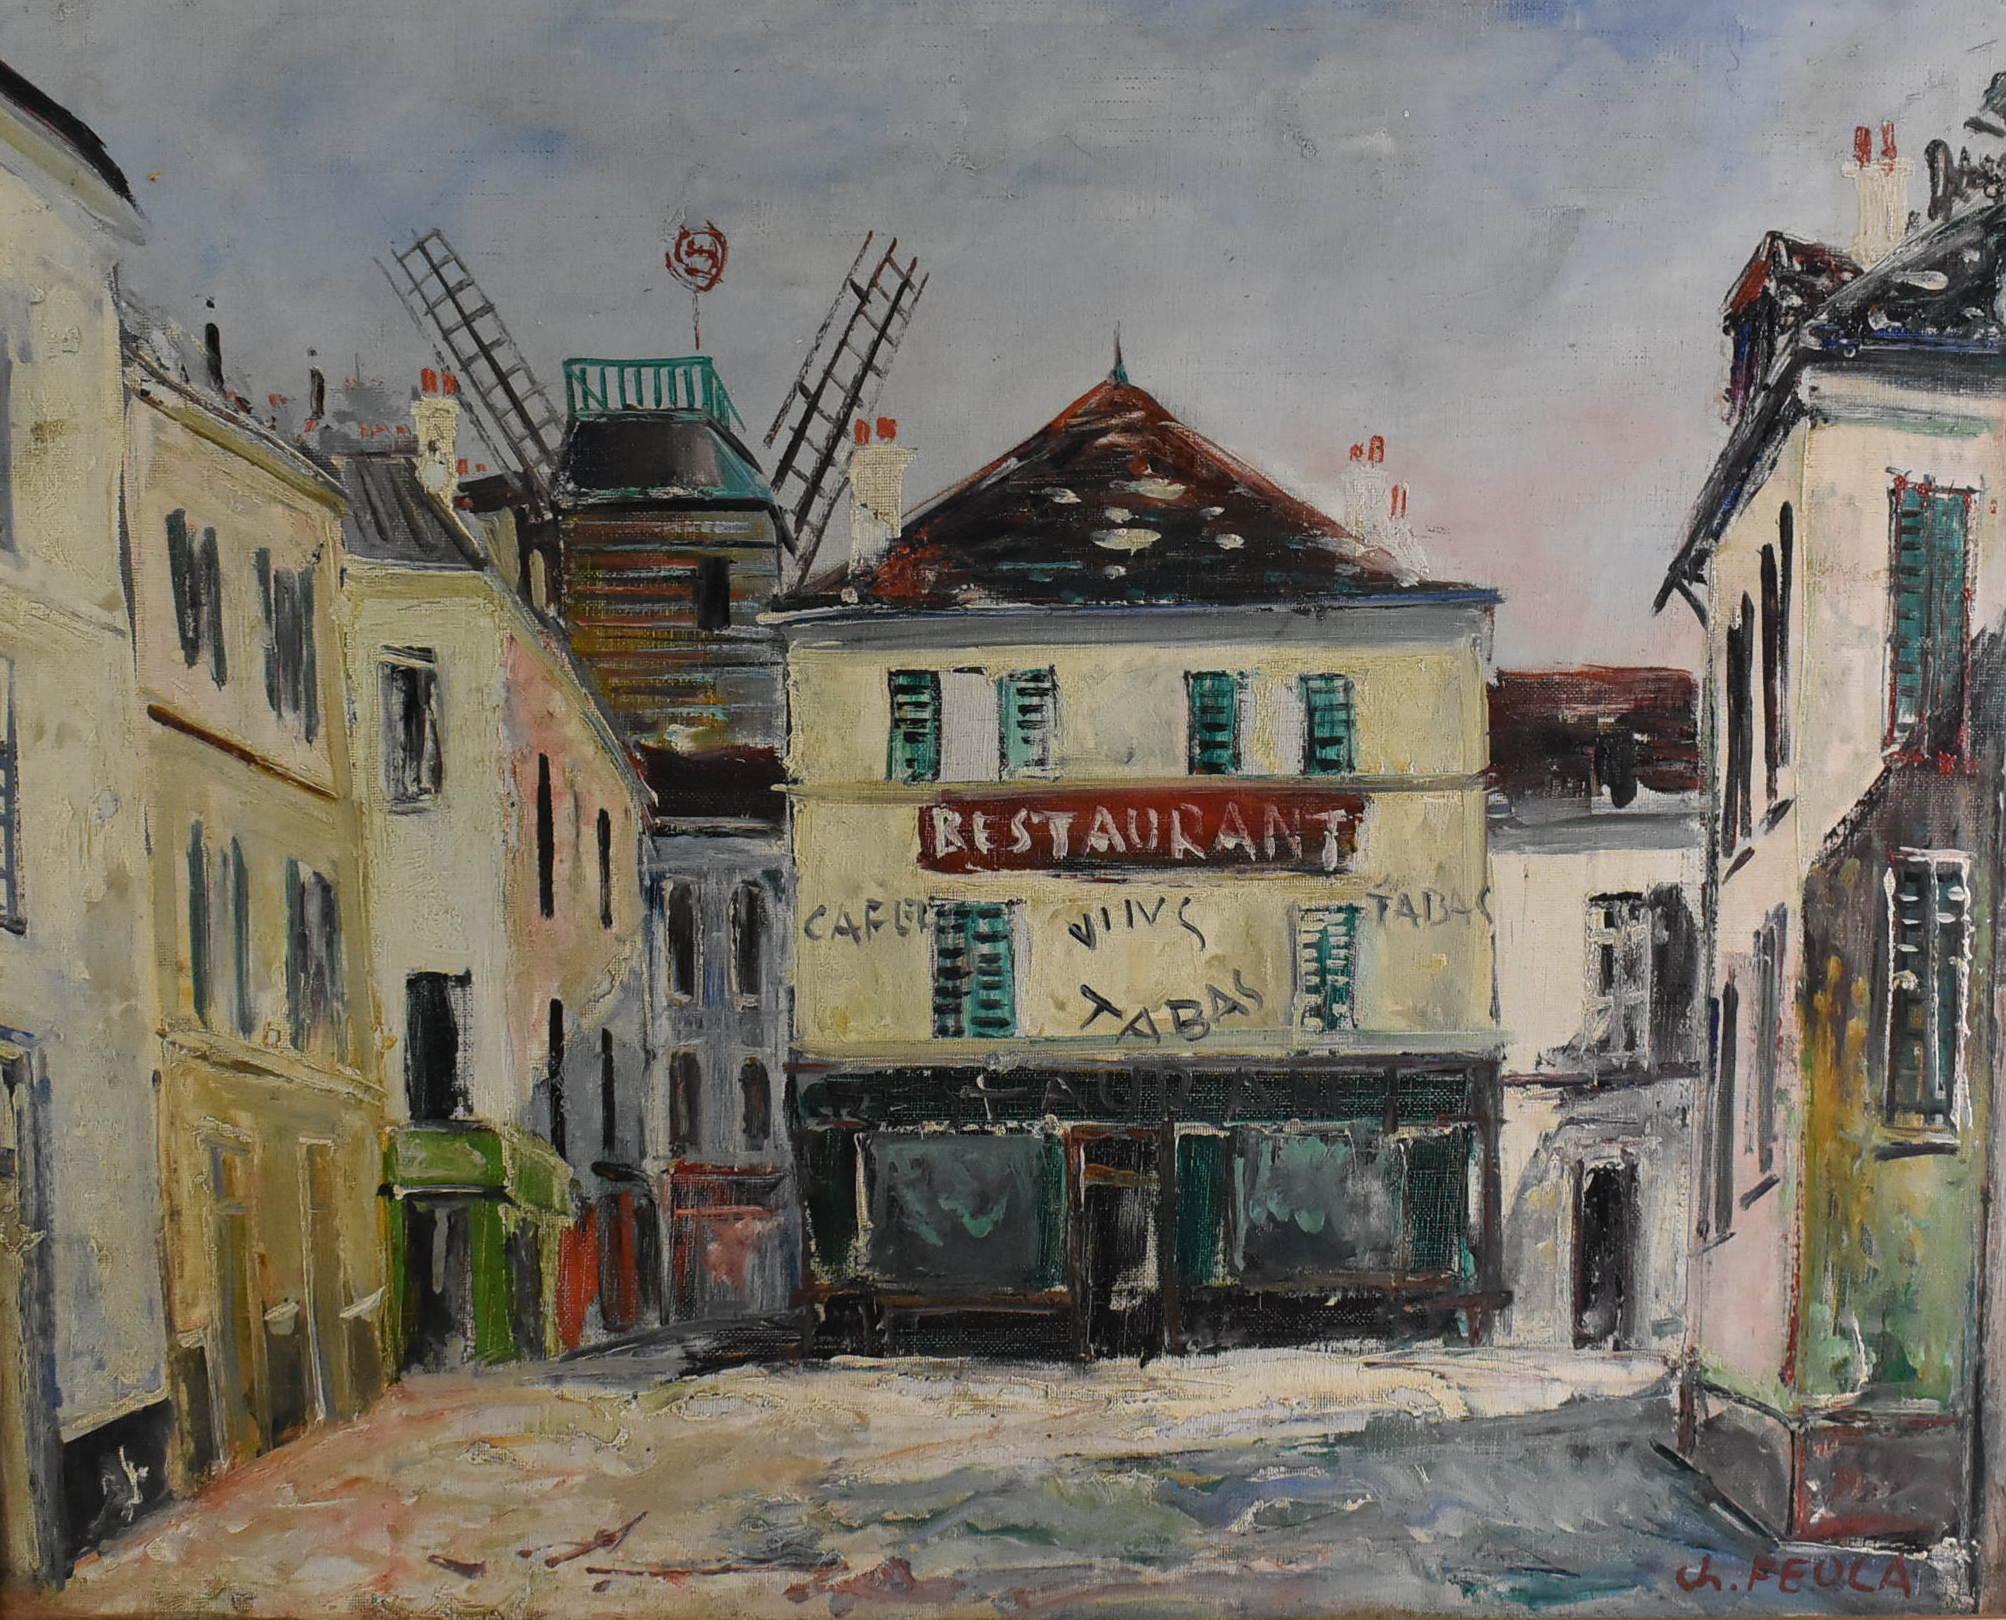 Oil on canvas by Charles Feola, 1917-1994. Impressionist painting on canvas of a Paris street scene. Signed lower right. Very nice condition. Image size measures 22.44